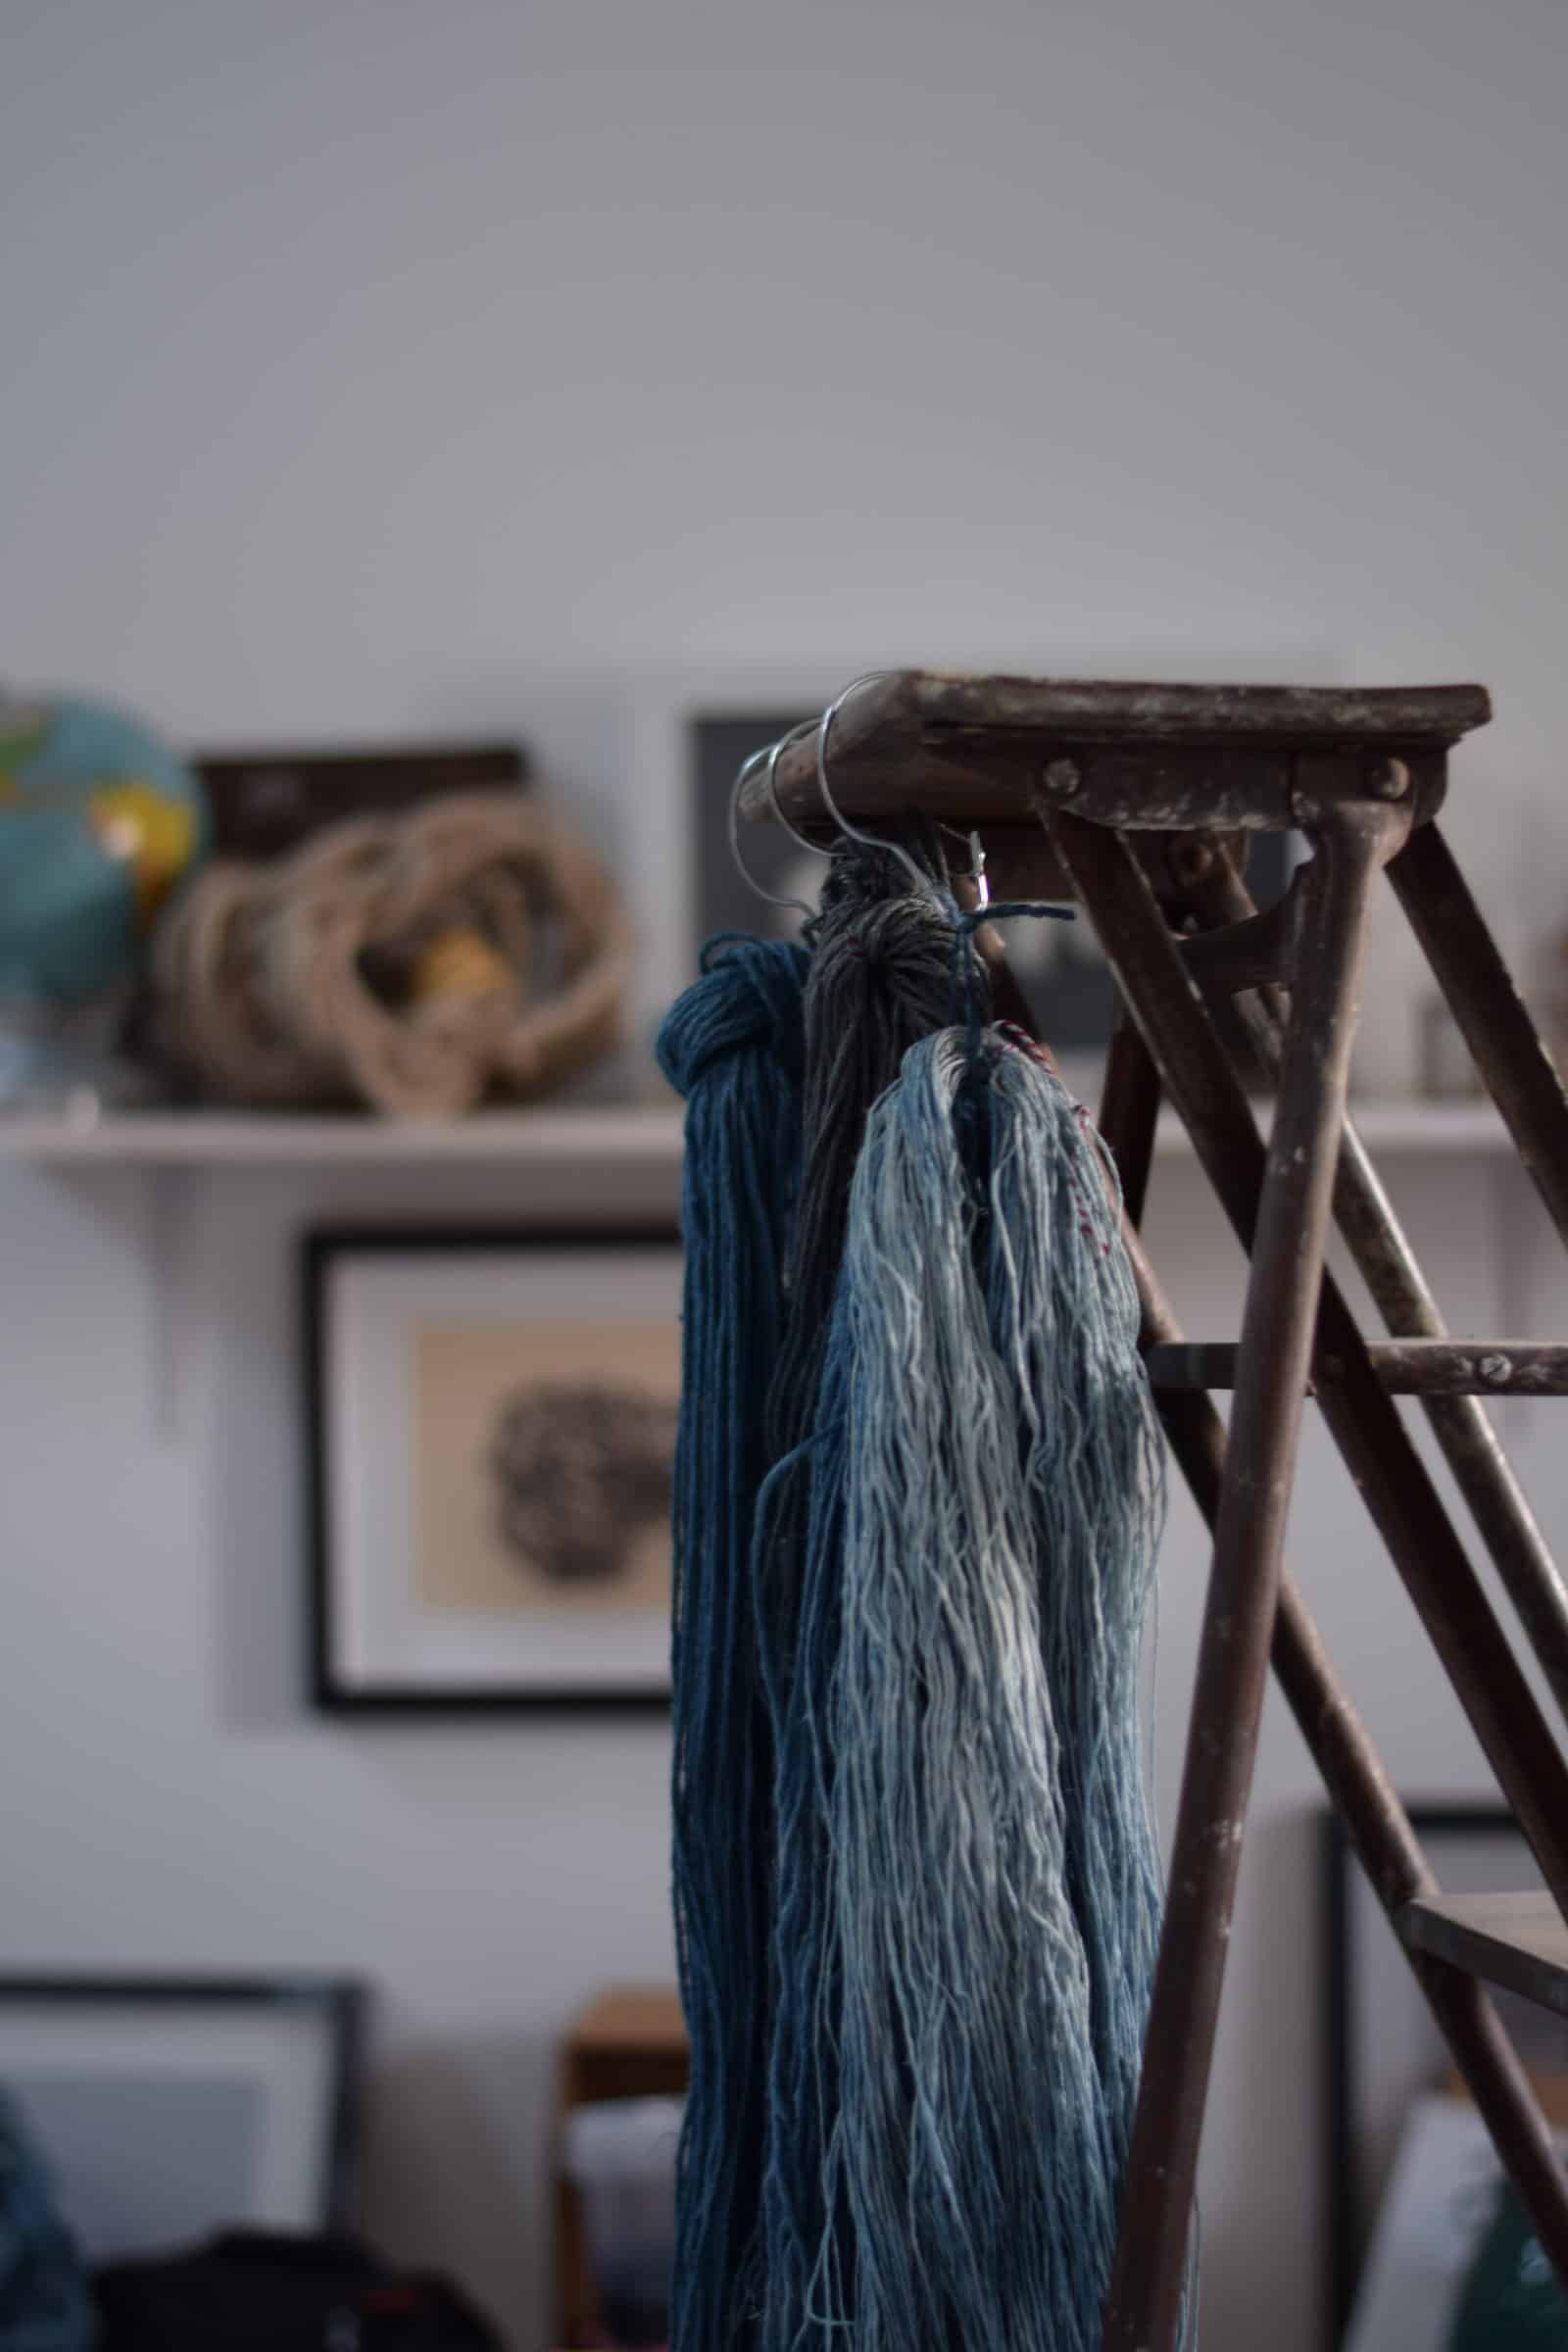 skeins of linen hand-dyed with natural indigo pigments by Aude Franjou